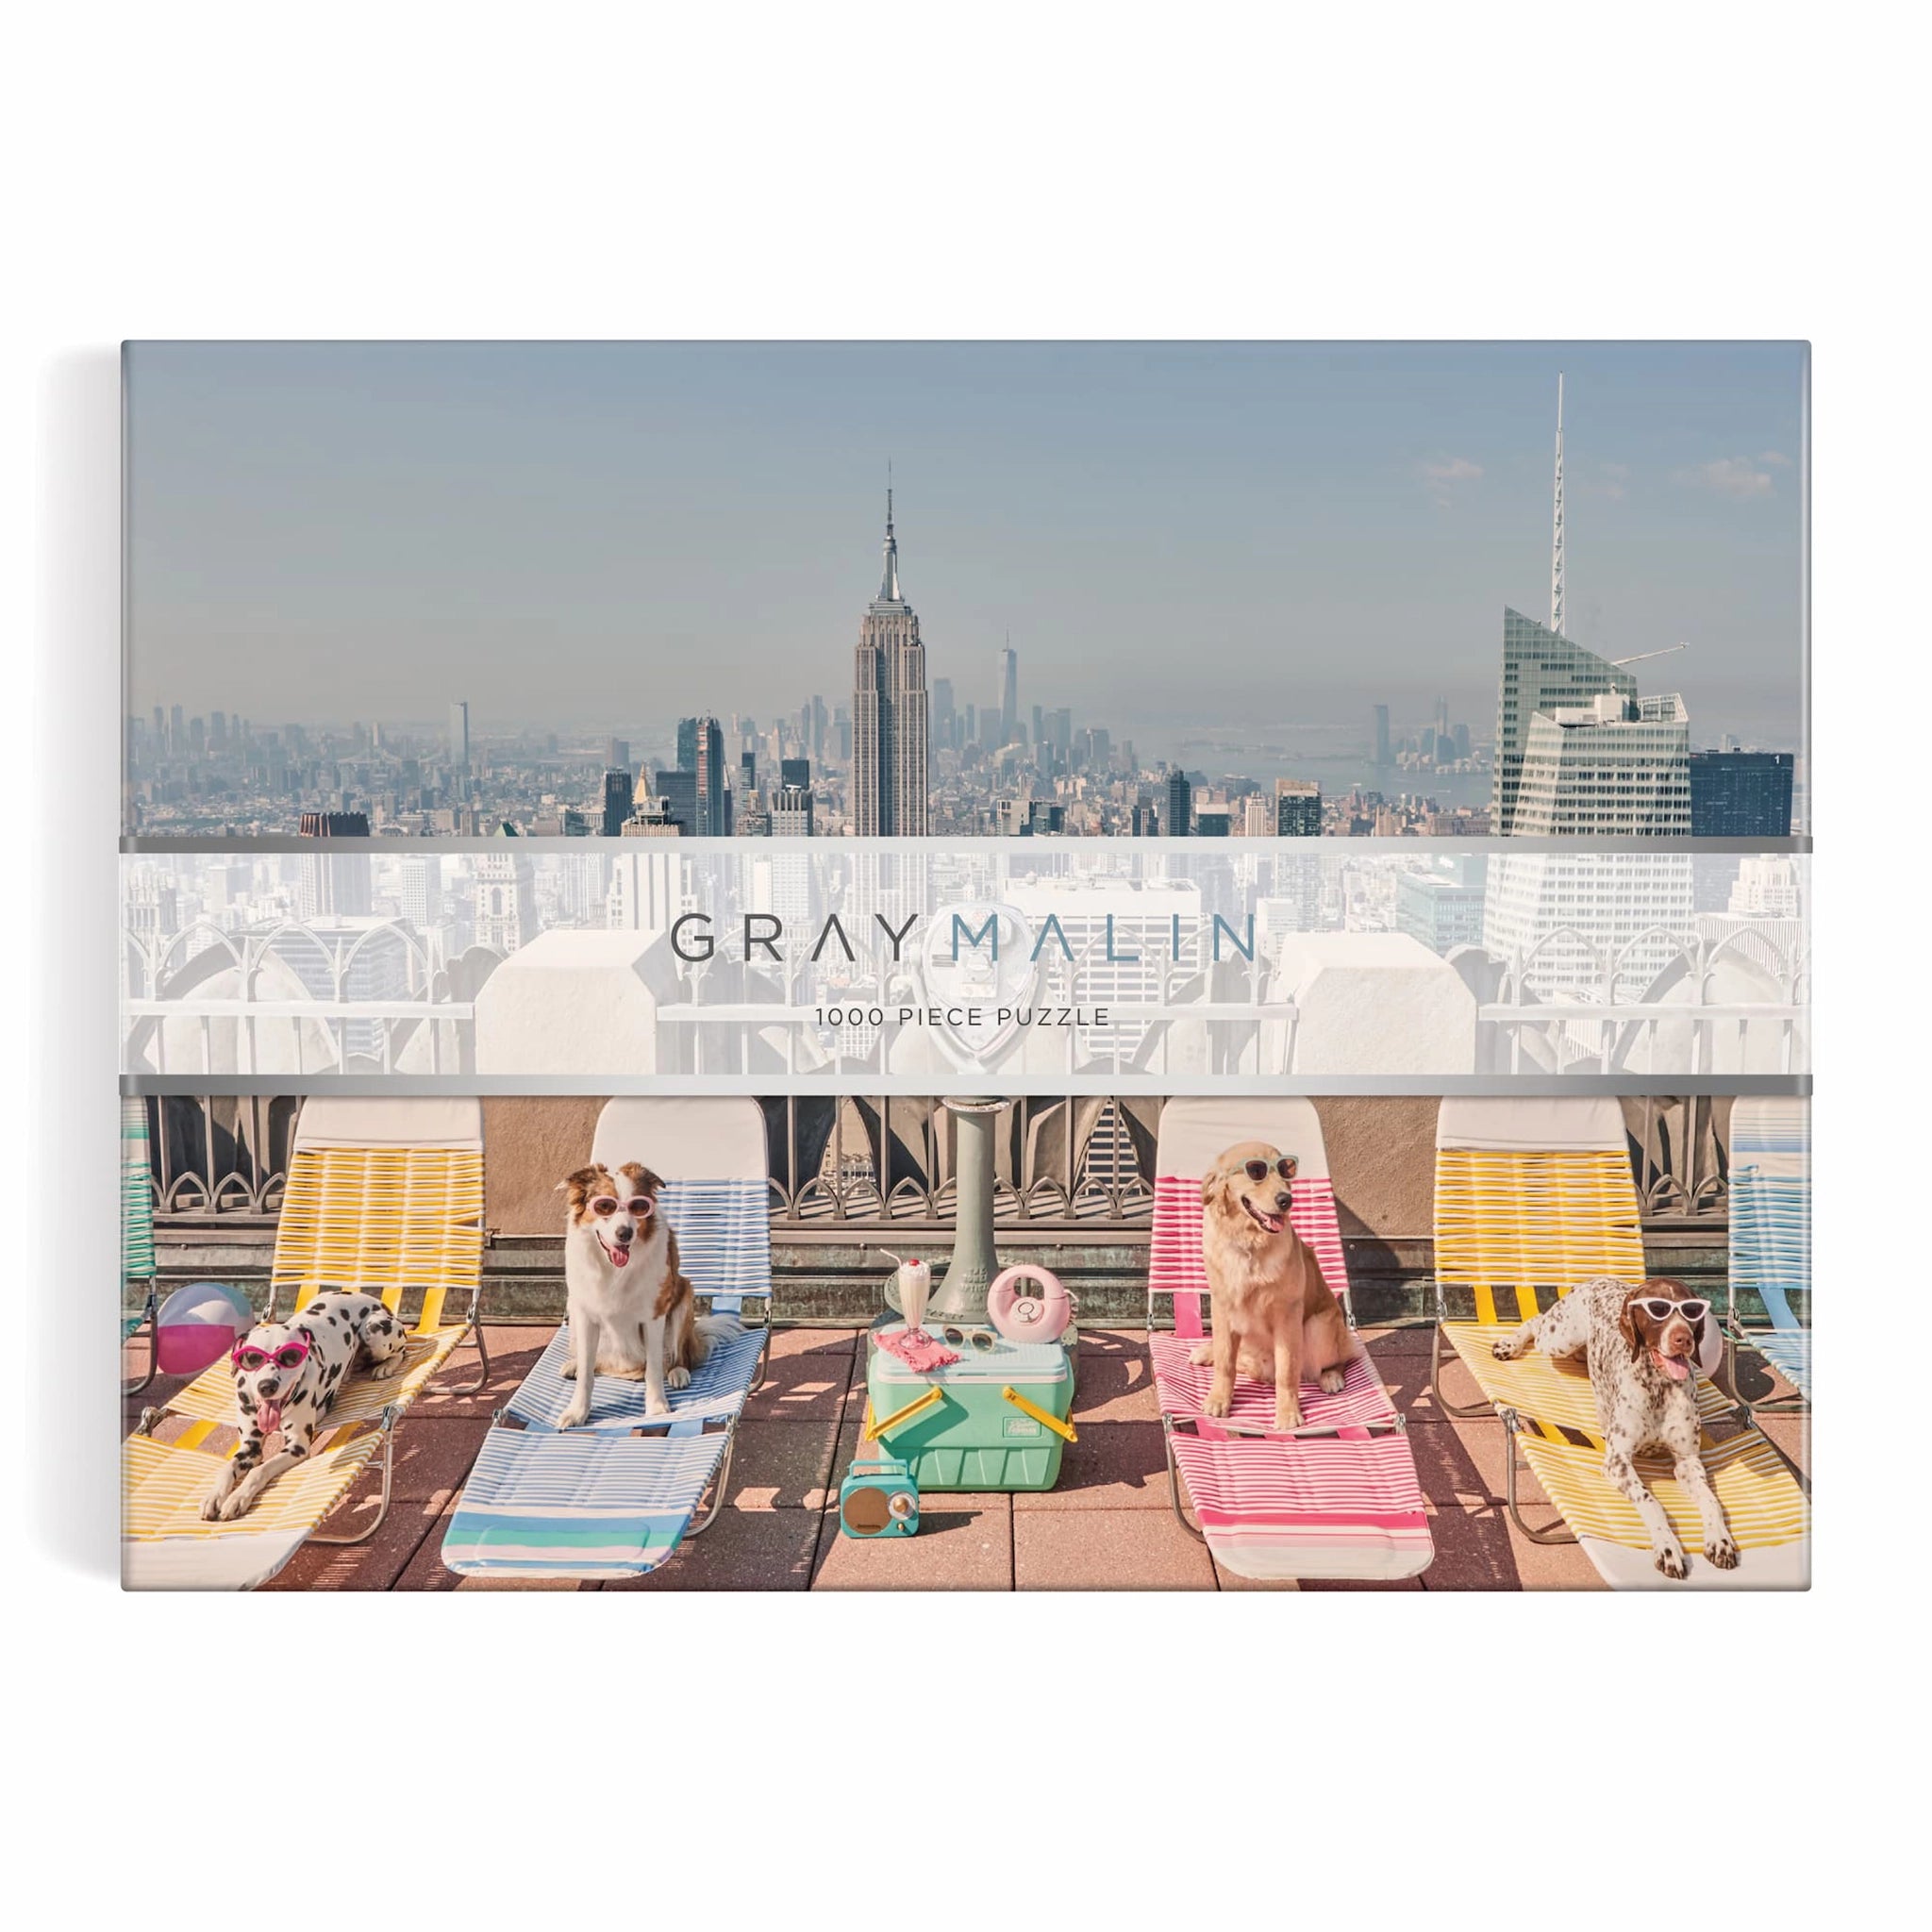 A puzzle in a box with a photograph of New York City with different breeds of dogs wearing sunglasses and sitting on a rooftop on sun chairs.